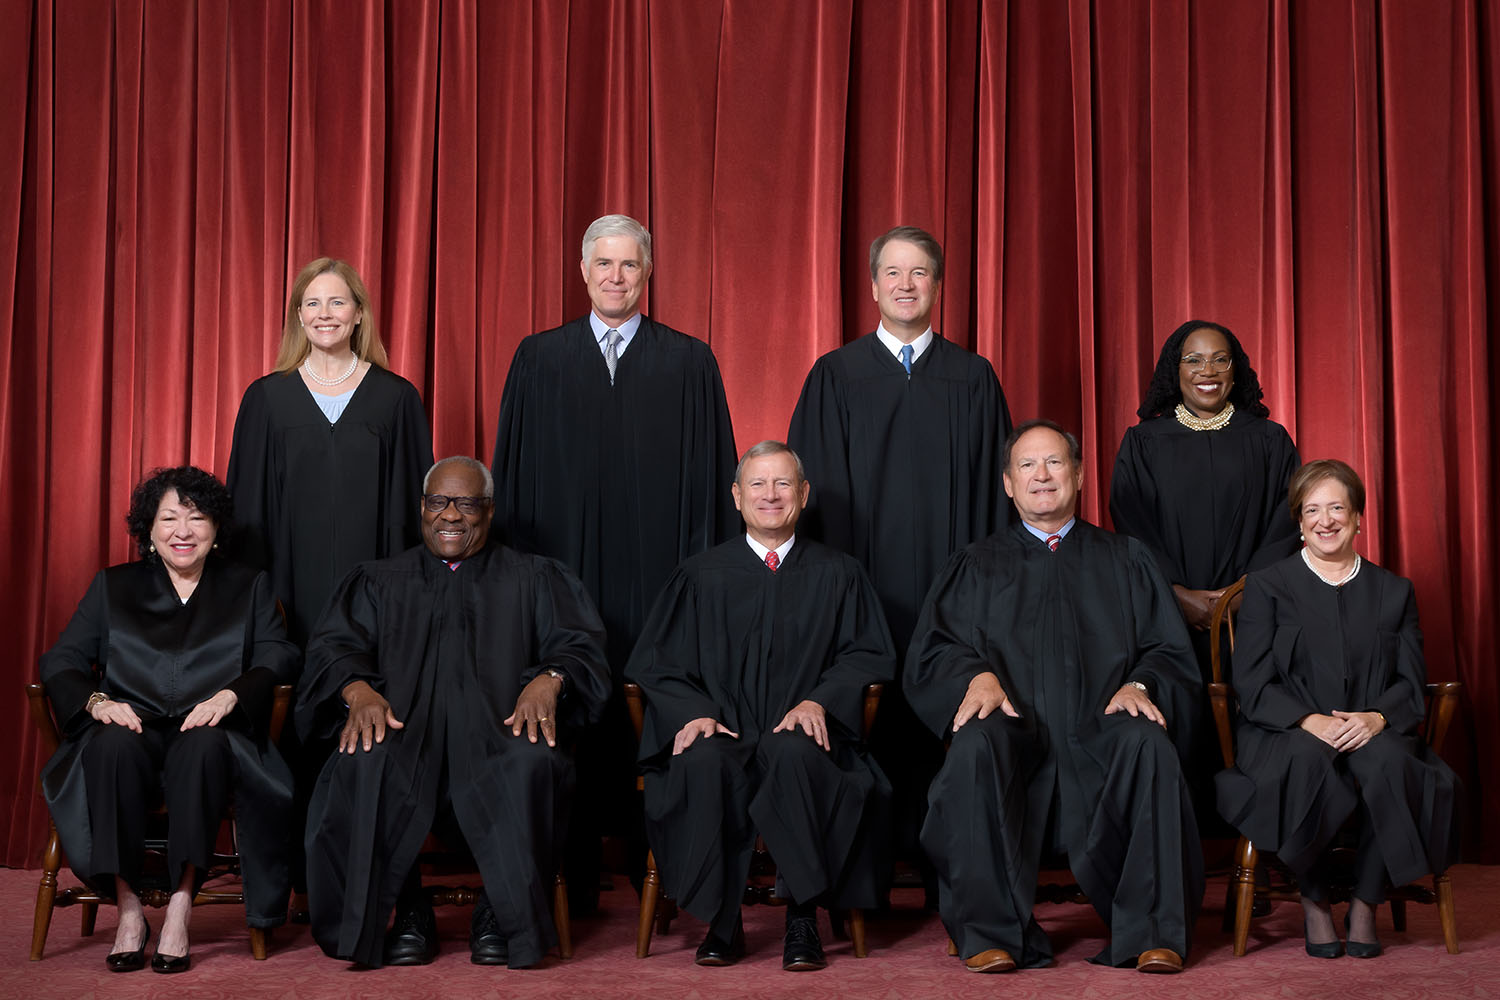 Current members of the U.S. Supreme Court (photograph from October 2022).